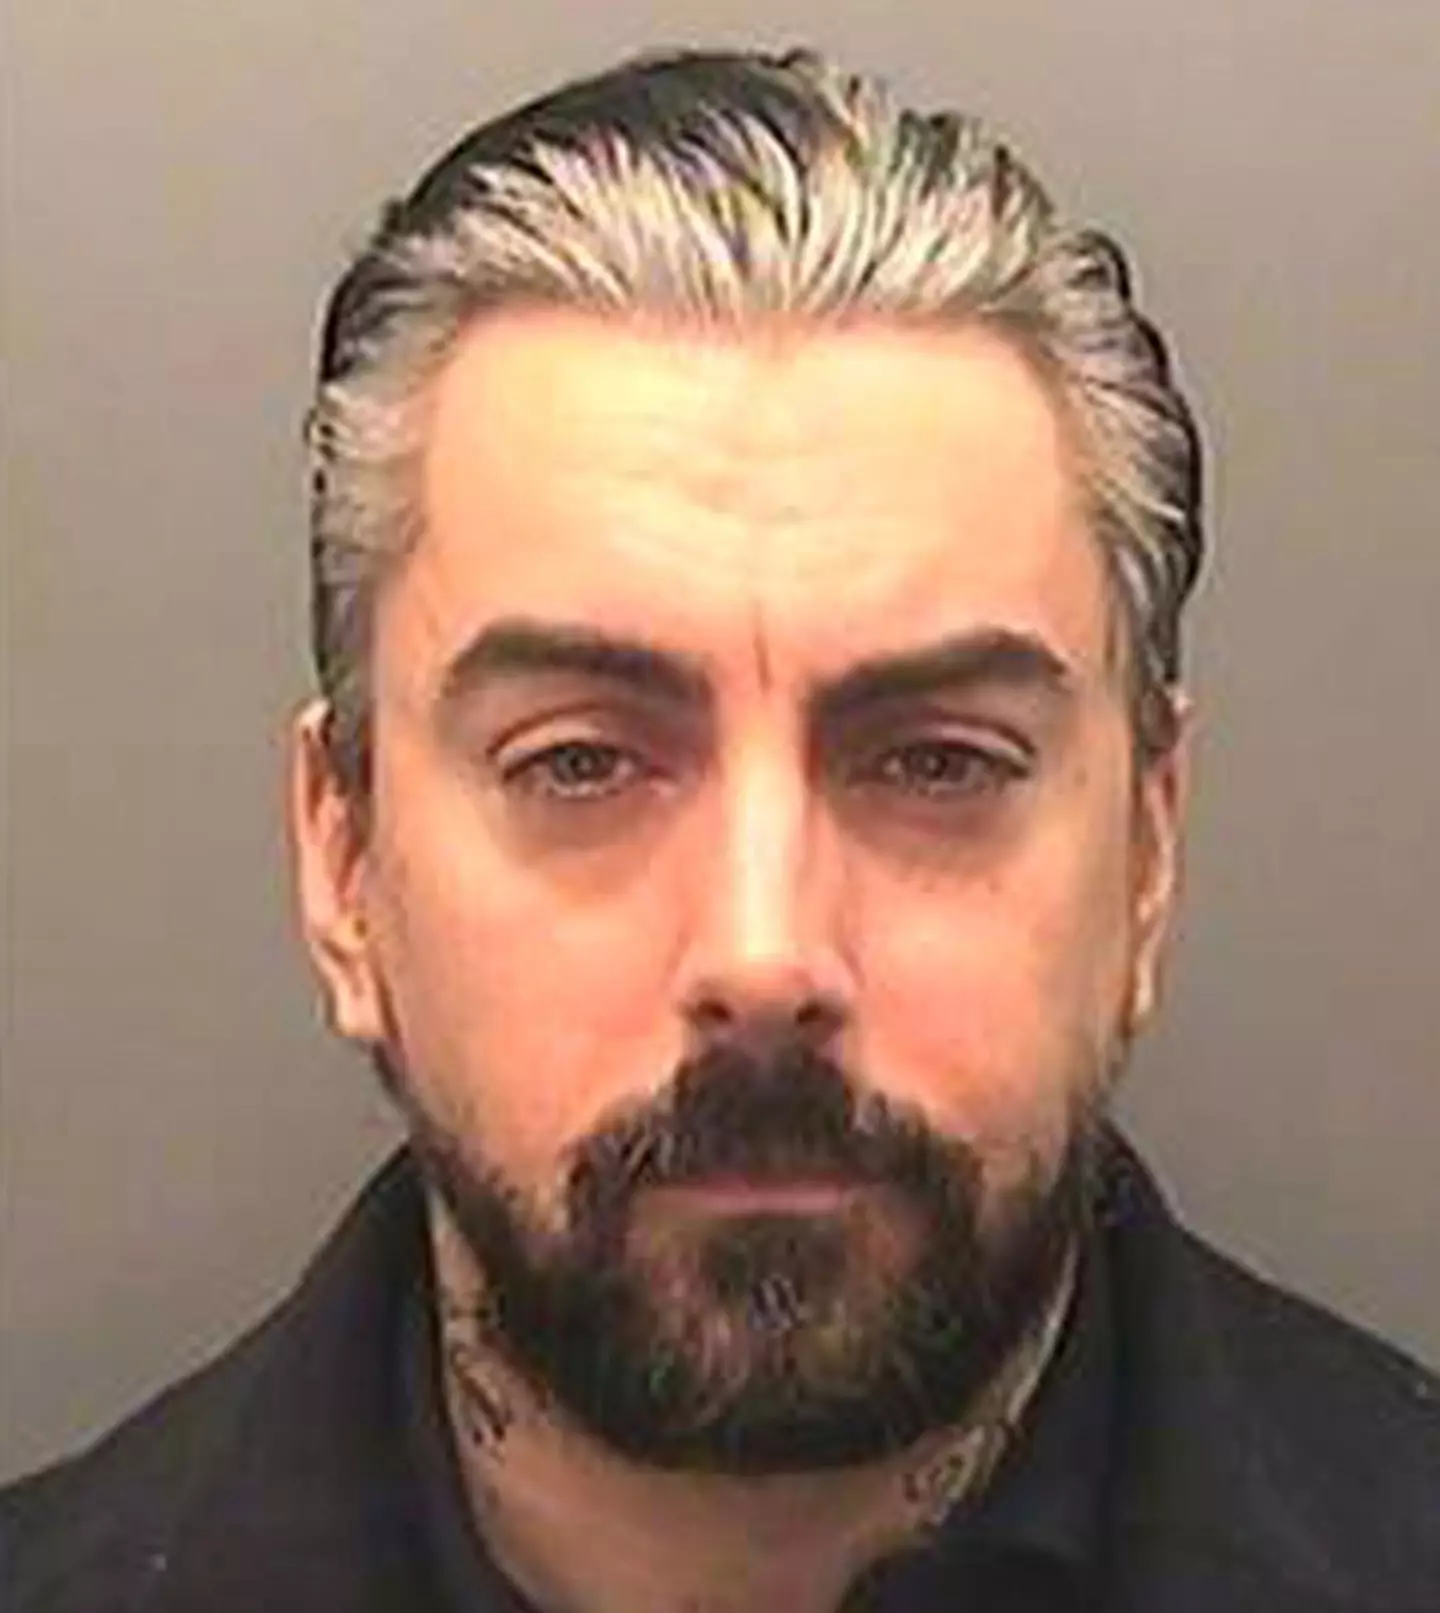 Ian Watkins is currently in prison in relation to a string of child sex offences.